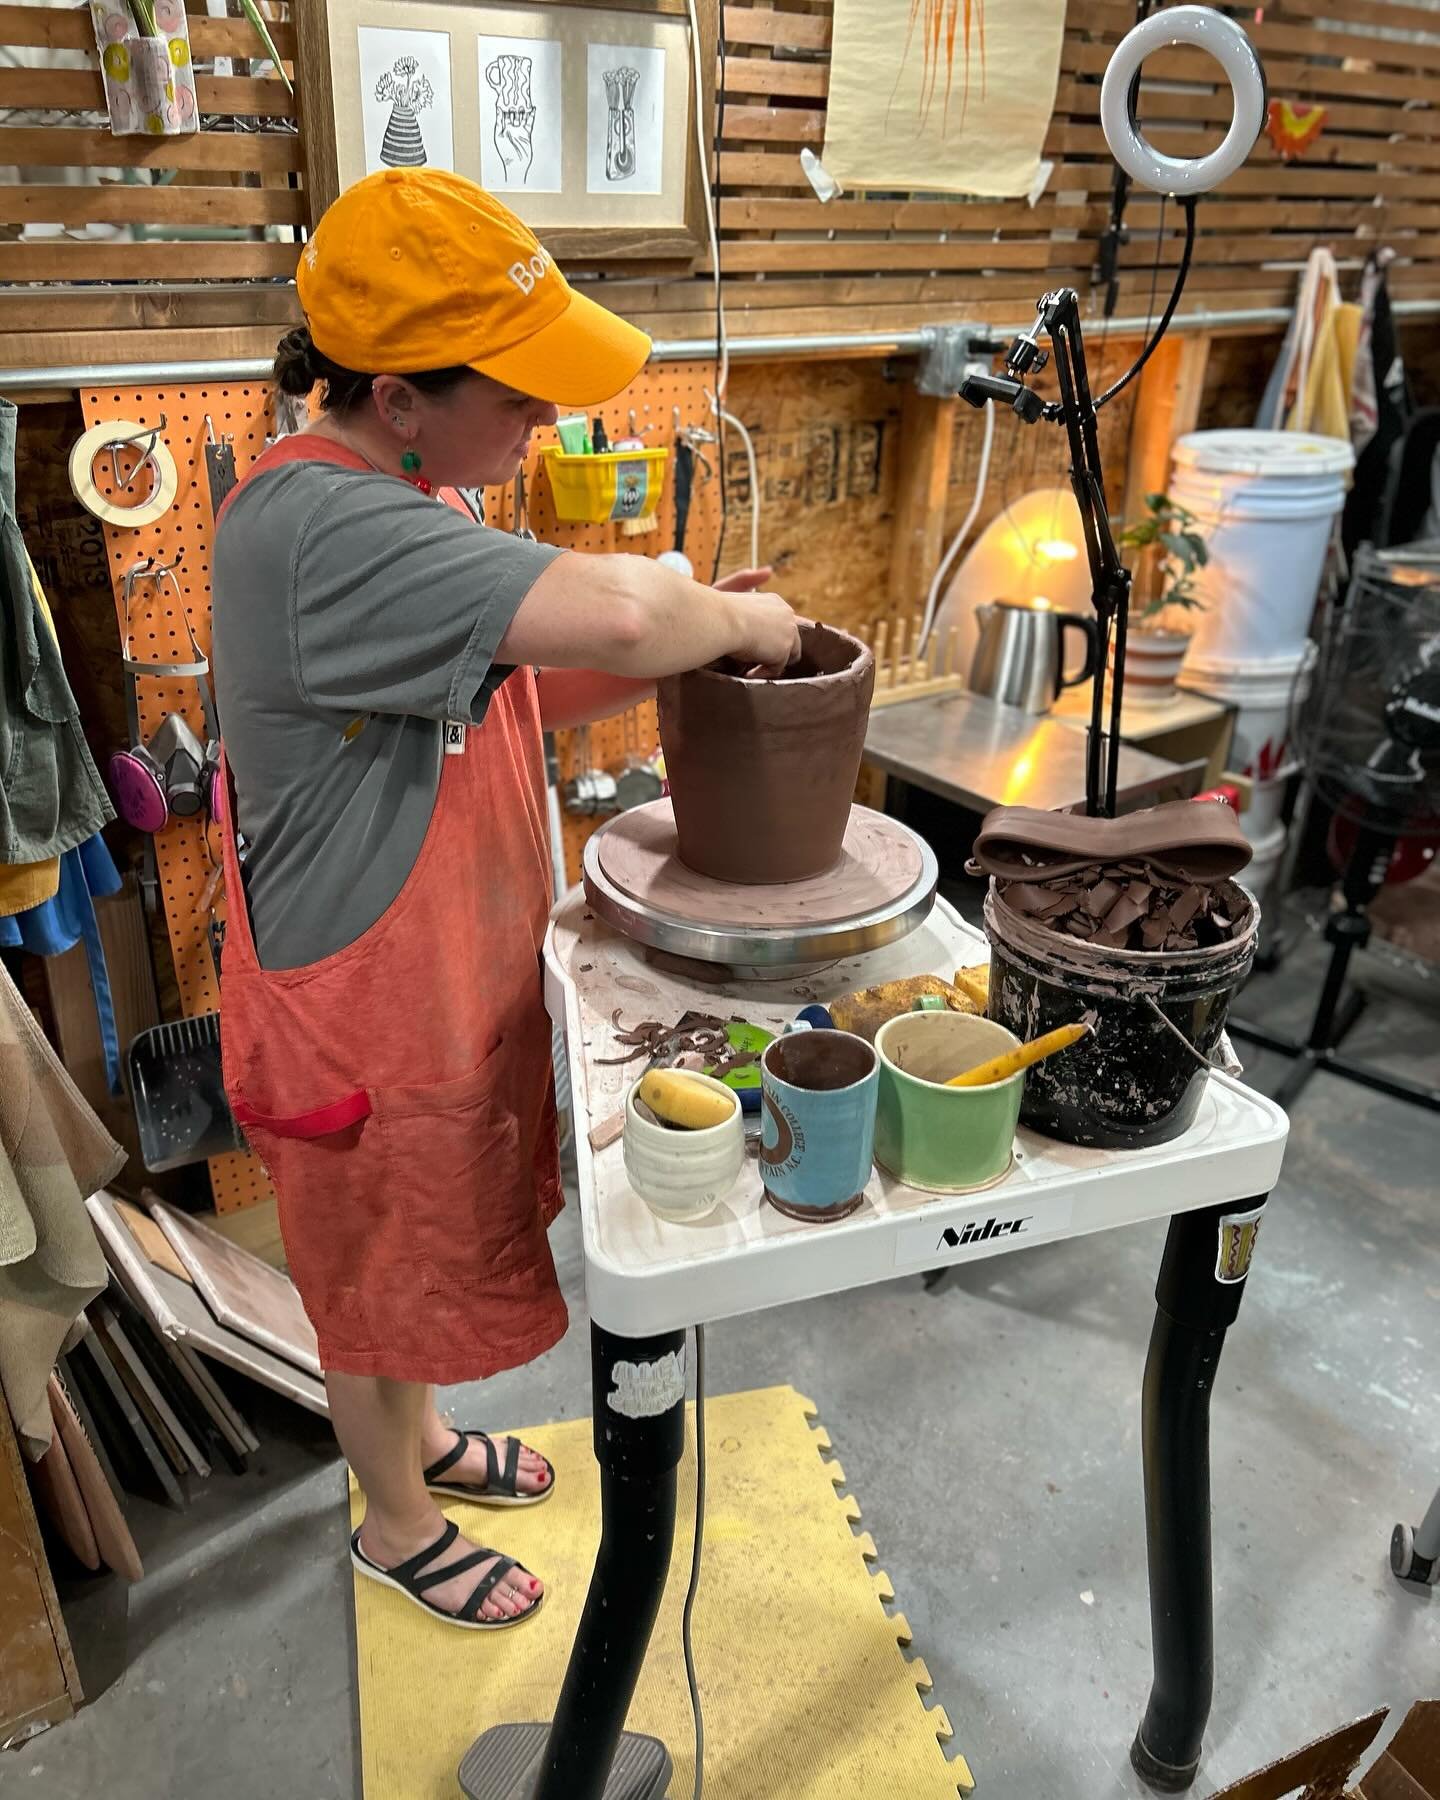 🏺Working on making bigger pots! Stay tuned to see how they turn out! 🏺 

#bigpots #coilthrowing #shimpowheel #claykingceramics #828isgreat #riverartsdistrict #riverartsdistrictavl #asheville #ashevillenc #local #shopsmall #shoplocal #artist #potter